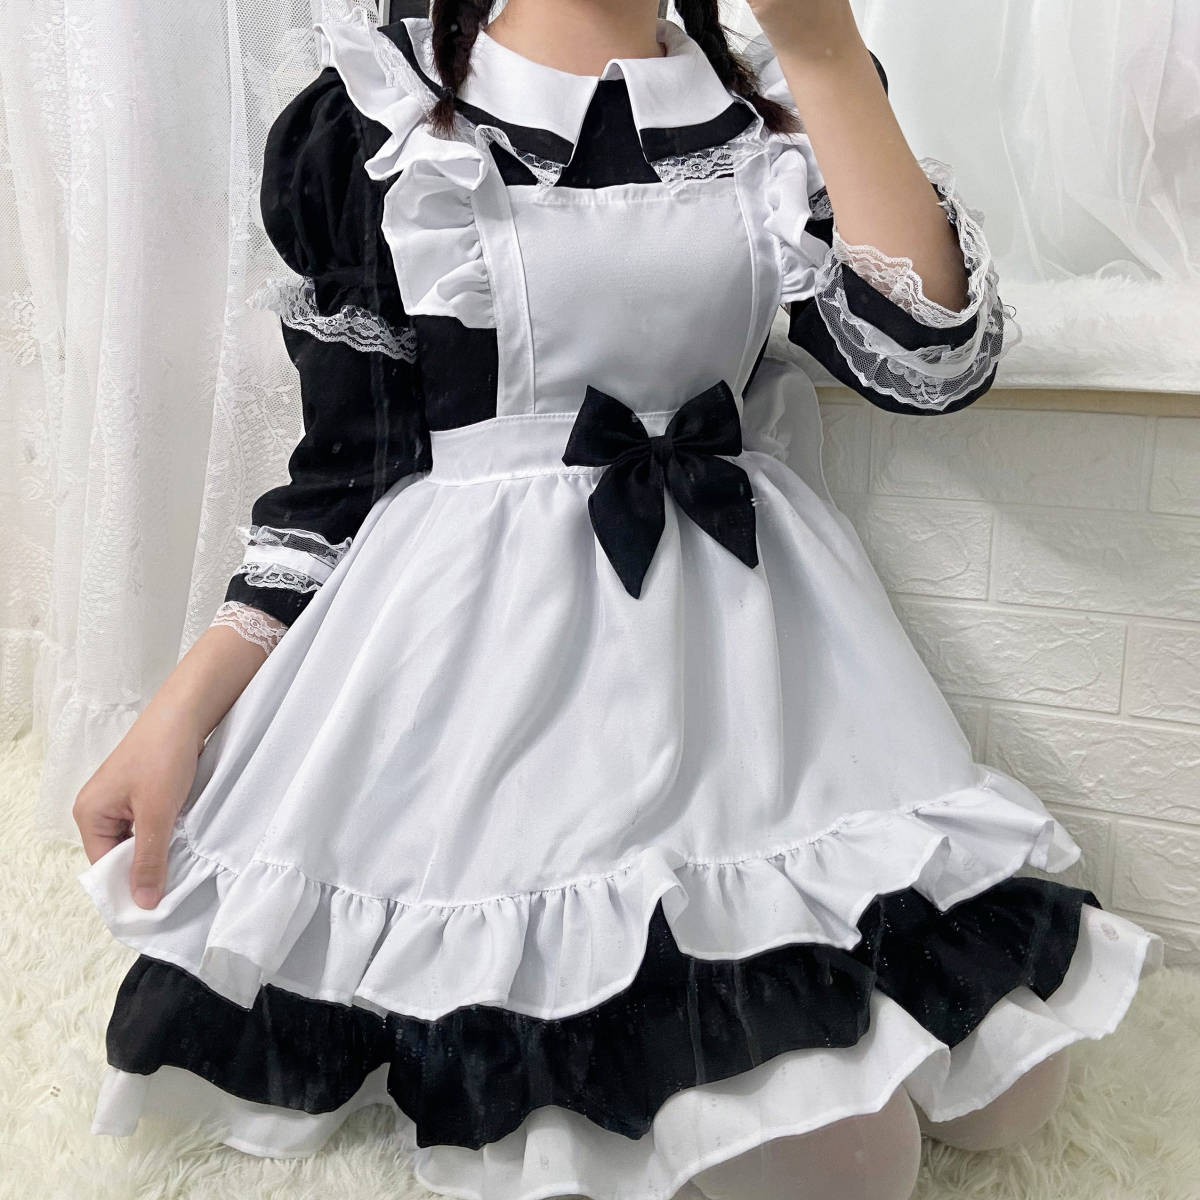  lady's made clothes Lolita culture festival lovely Halloween festival Event an educational institution festival costume play clothes 